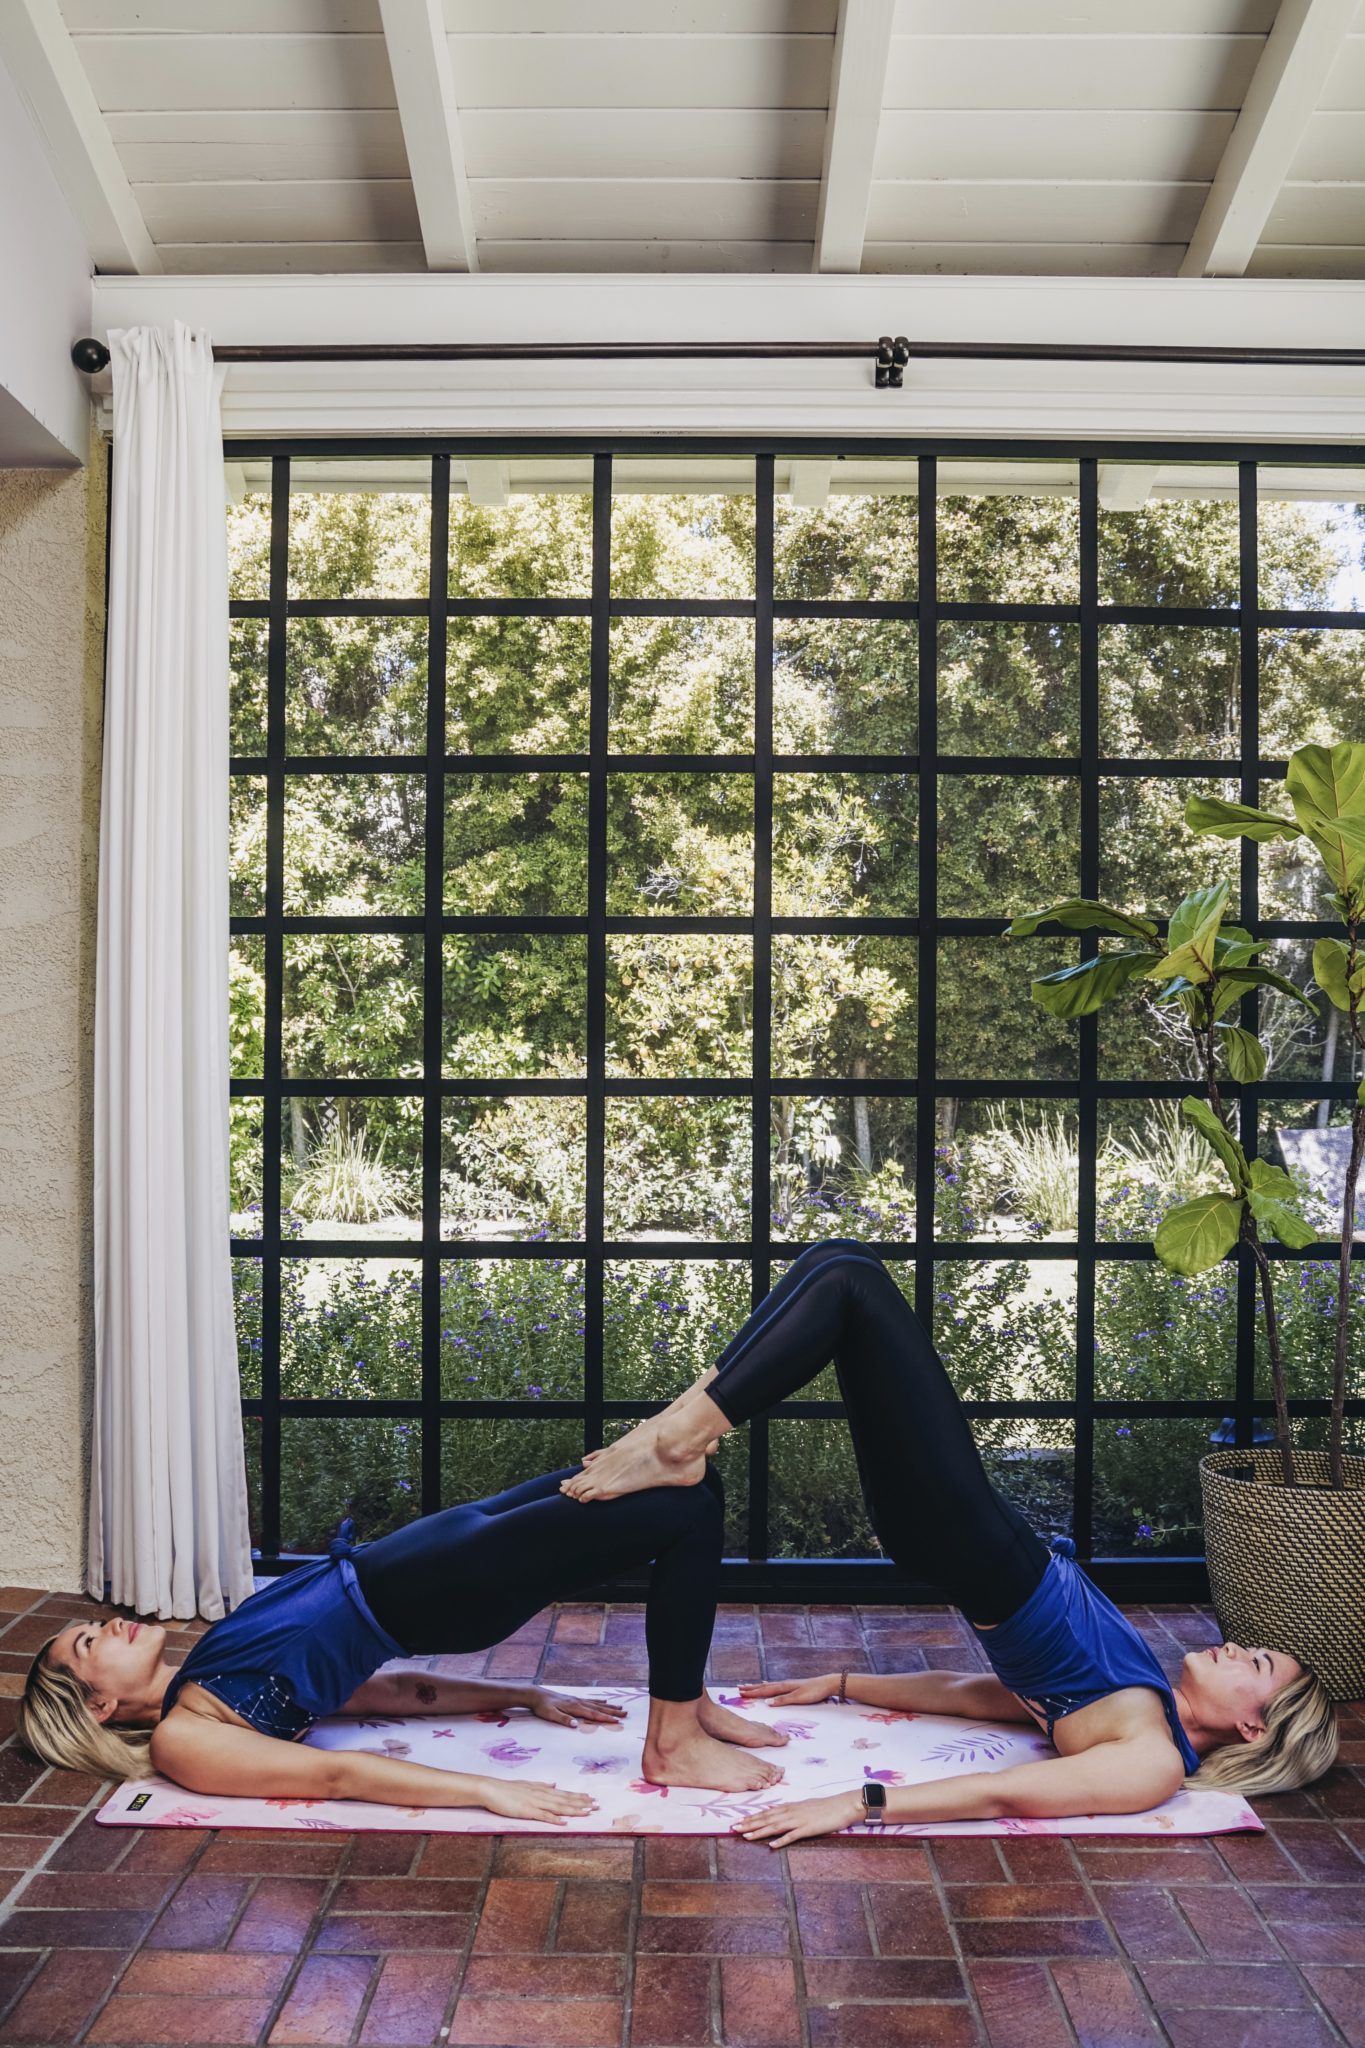 12 Couples Yoga Poses to Strengthen Your Relationship - PureWow